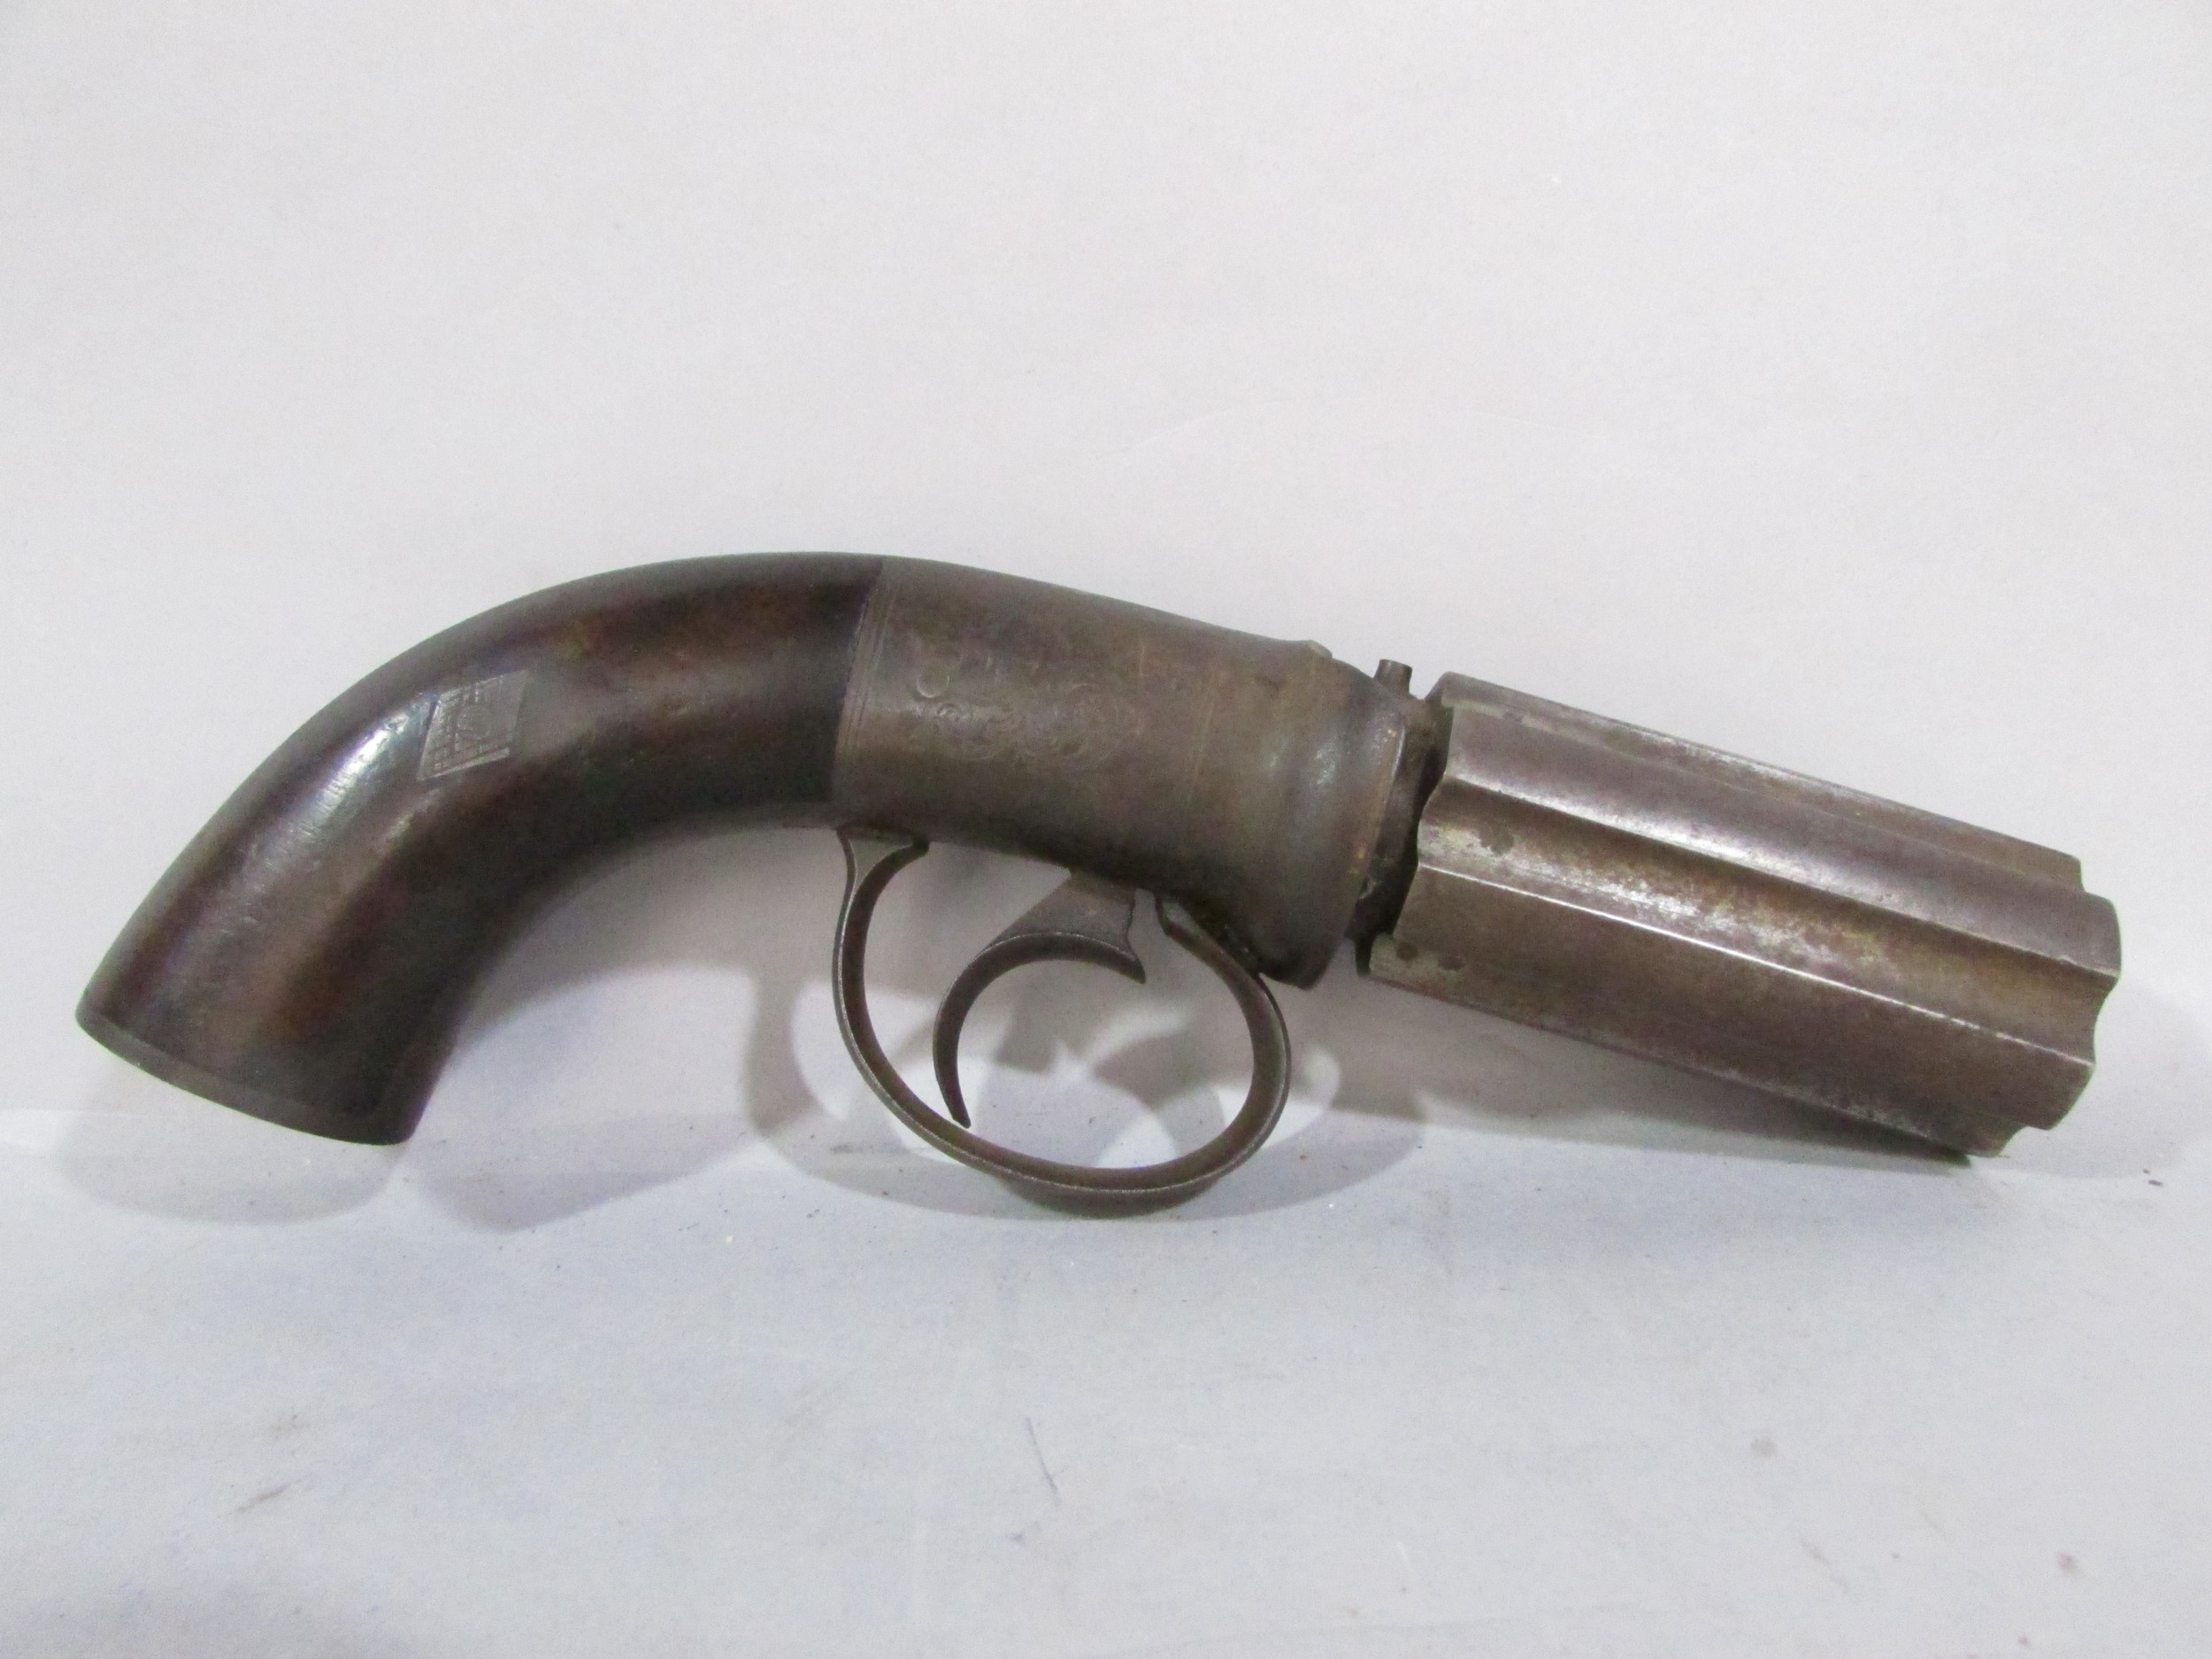 A 19th century English Pepperbox Pistol, with six chambers and engraved side plates, lacks hammer, - Image 2 of 3